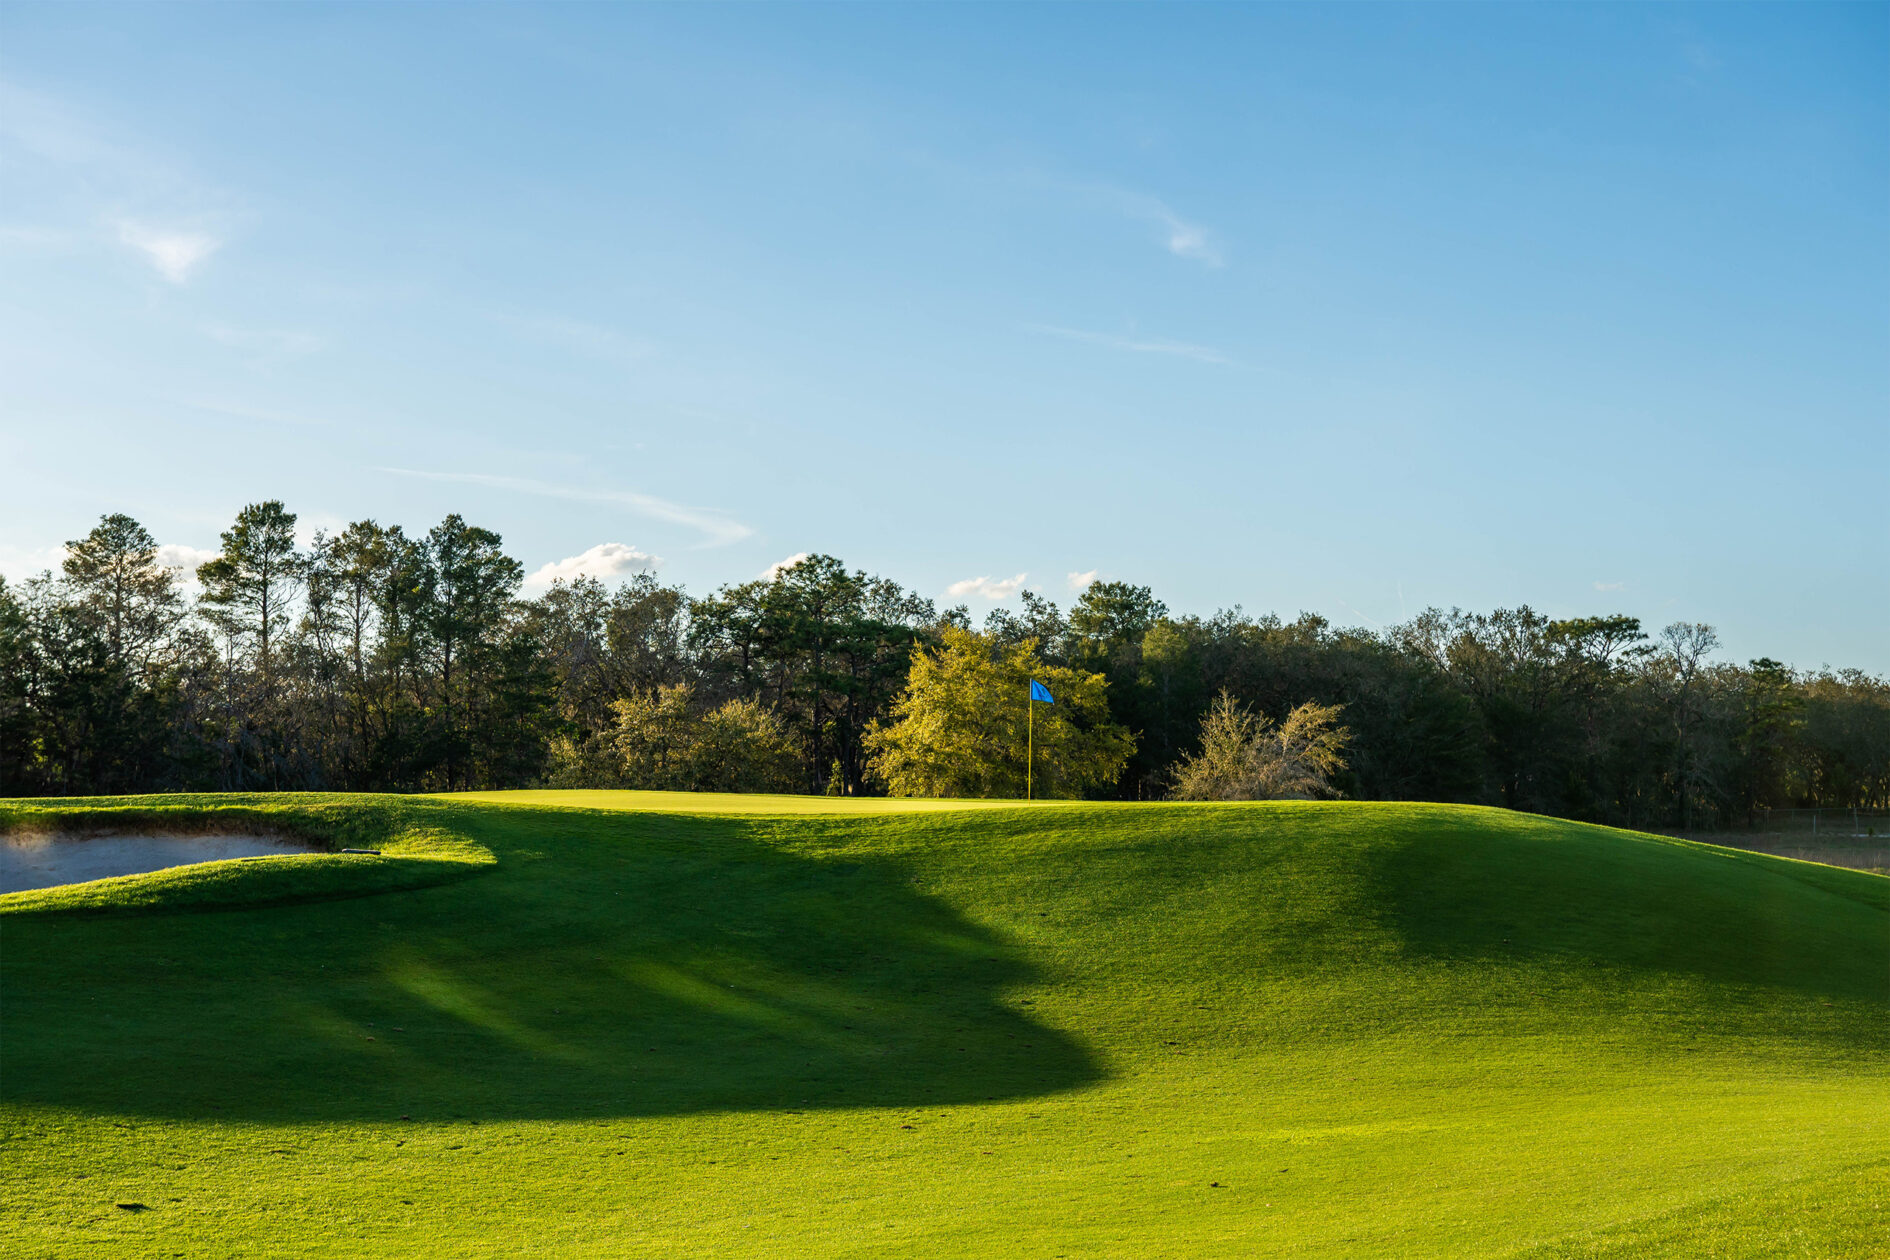 Golf course at The Bear’s Den Resort Orlando with hills, sand traps, and a single flag marking the hole on a distant putting green.